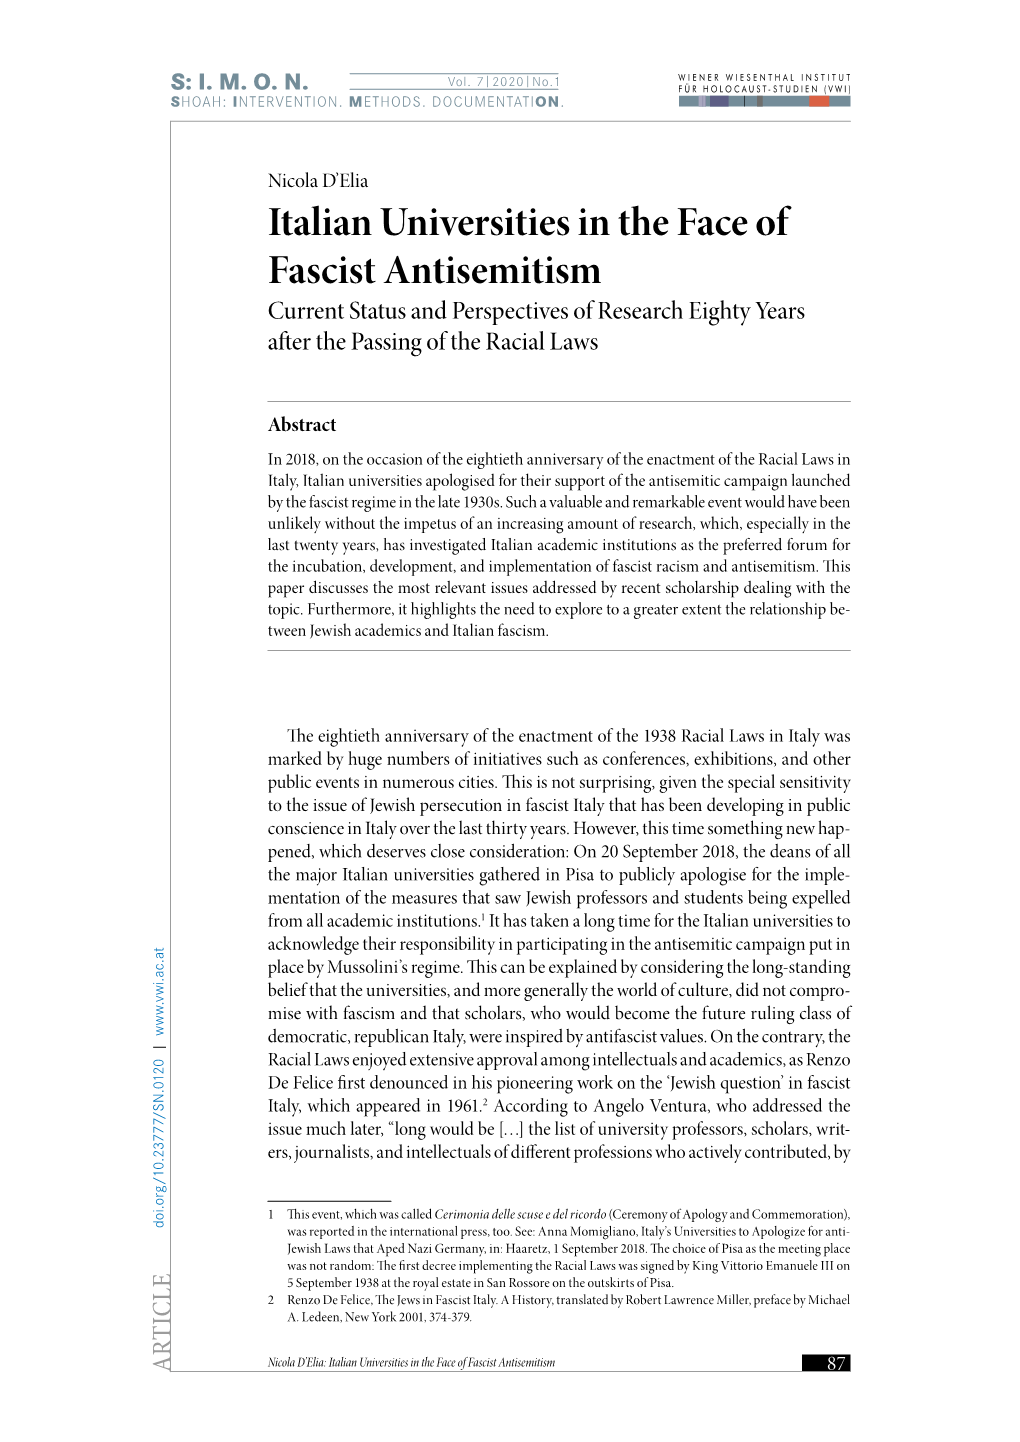 Italian Universities in the Face of Fascist Antisemitism Current Status and Perspectives of Research Eighty Years After the Passing of the Racial Laws